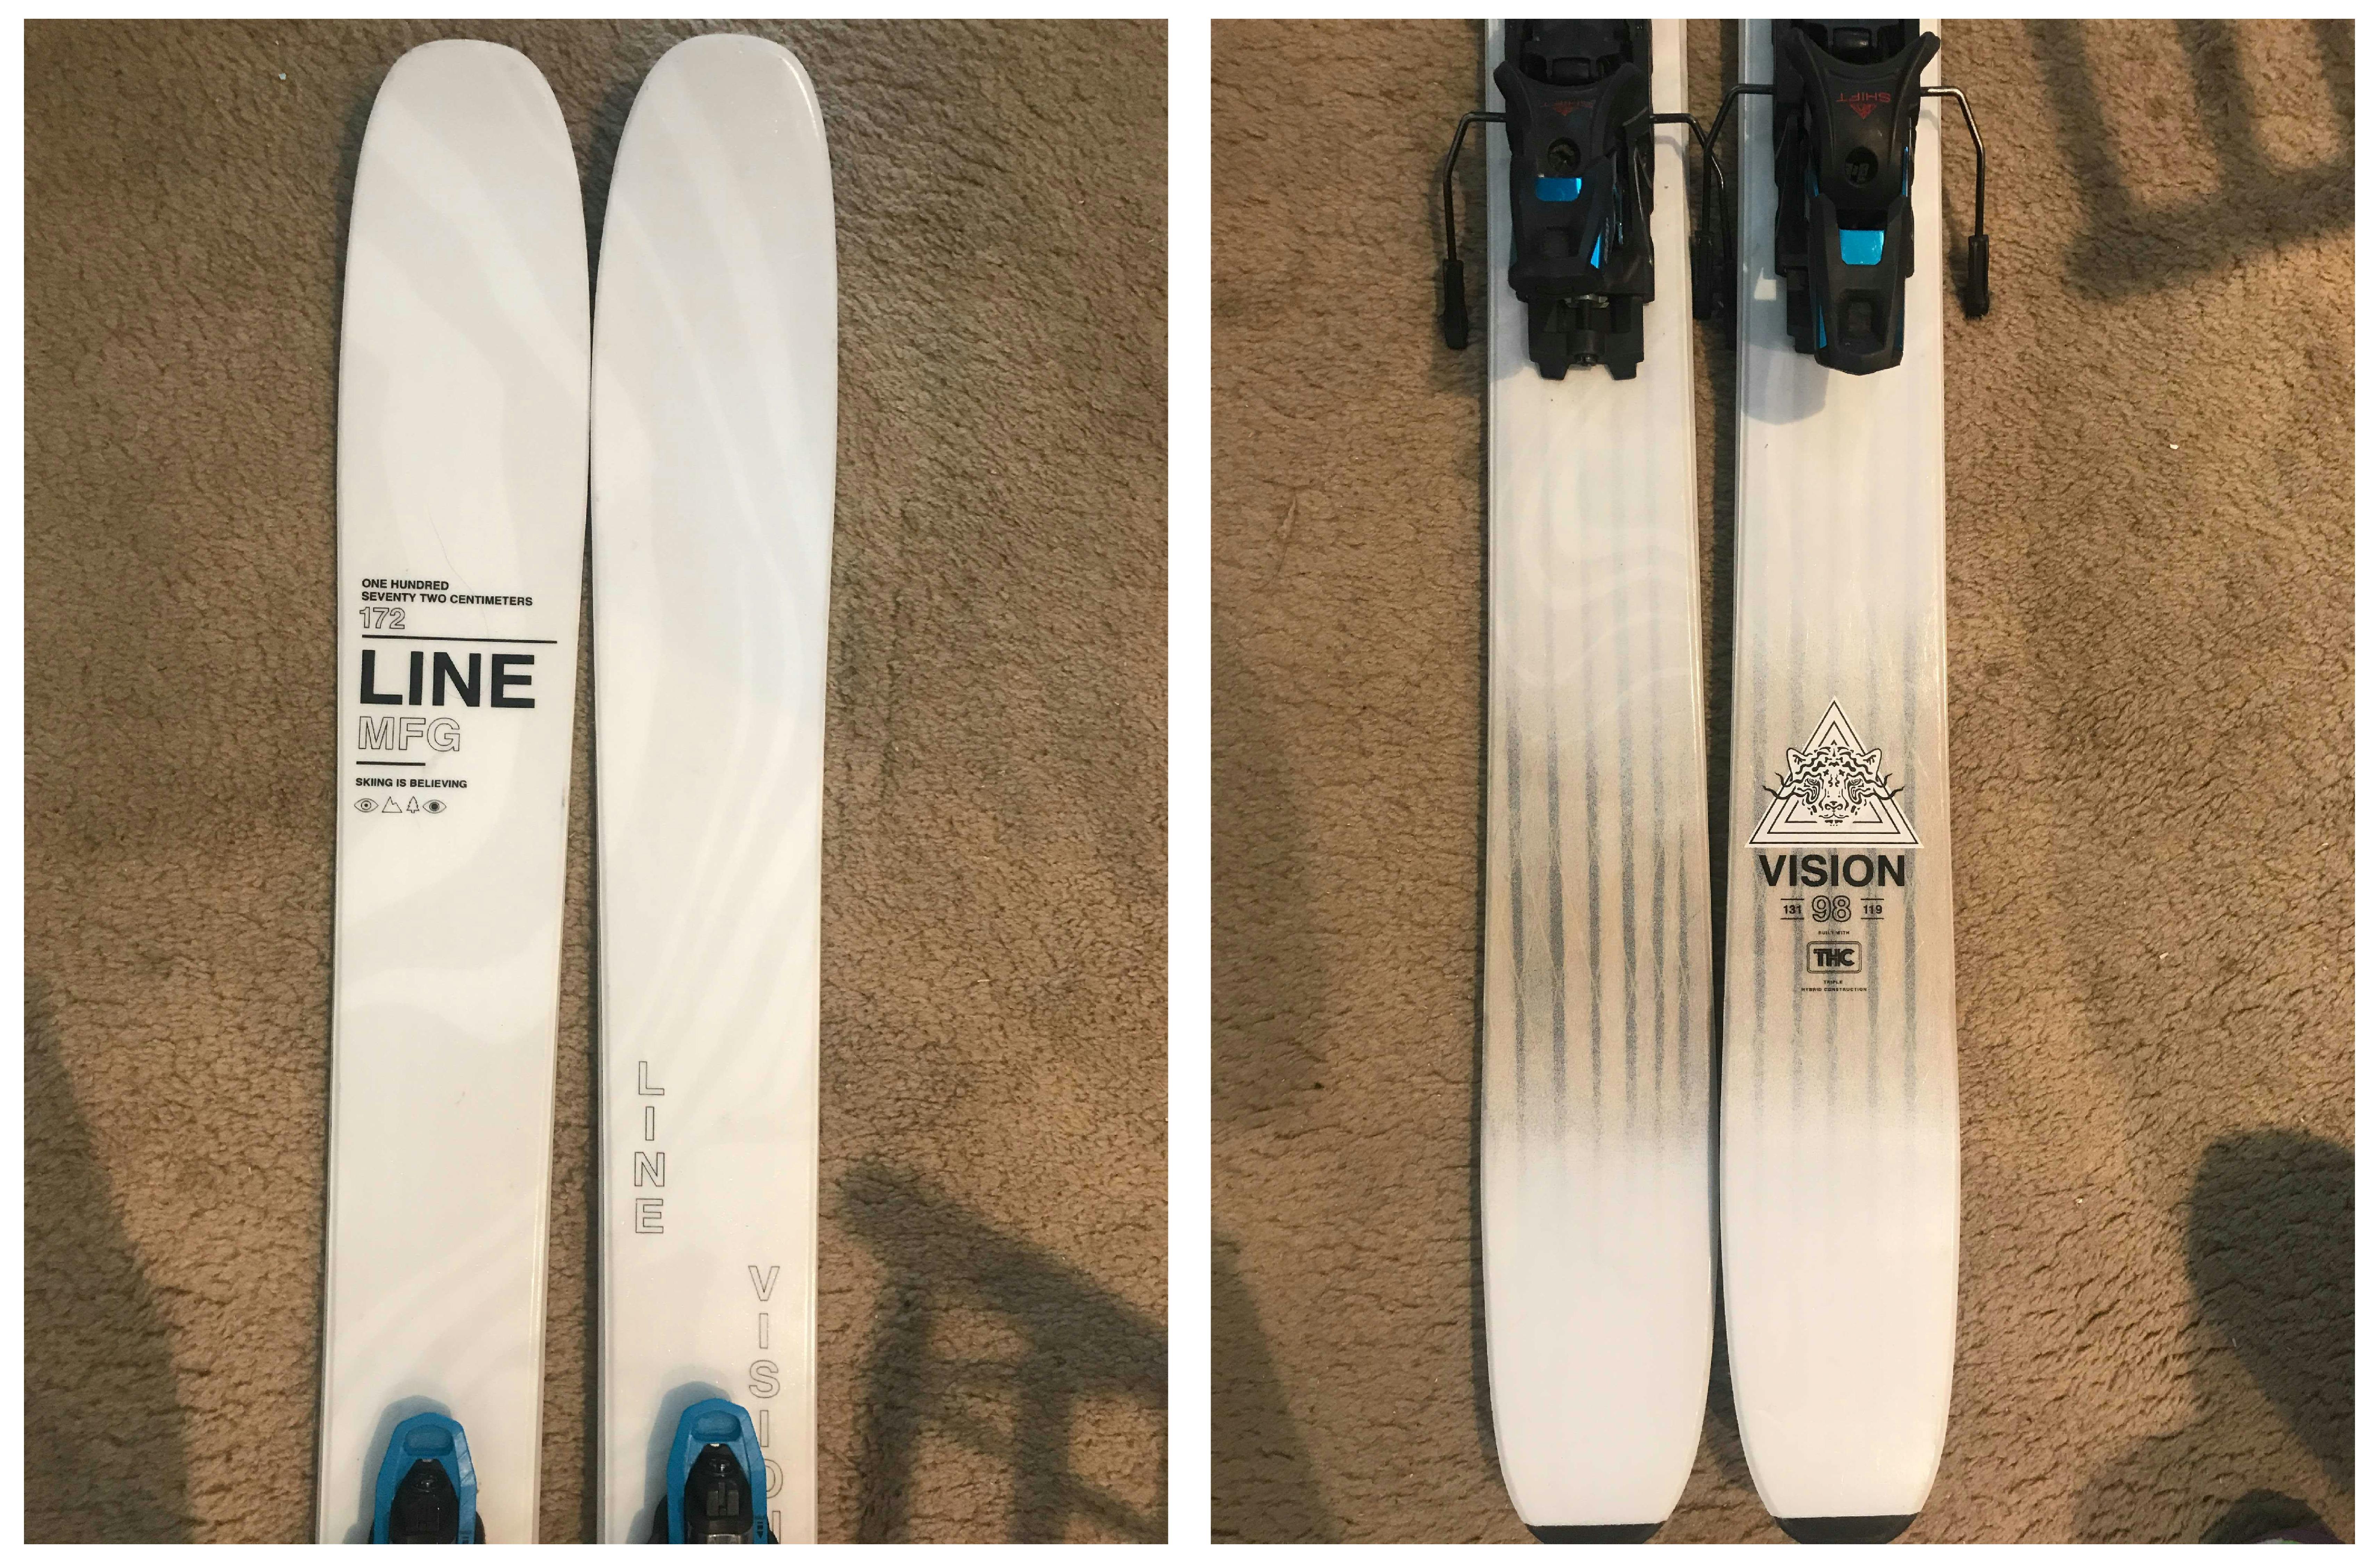 Closeup photos of the front and back of the Line 98 skis.